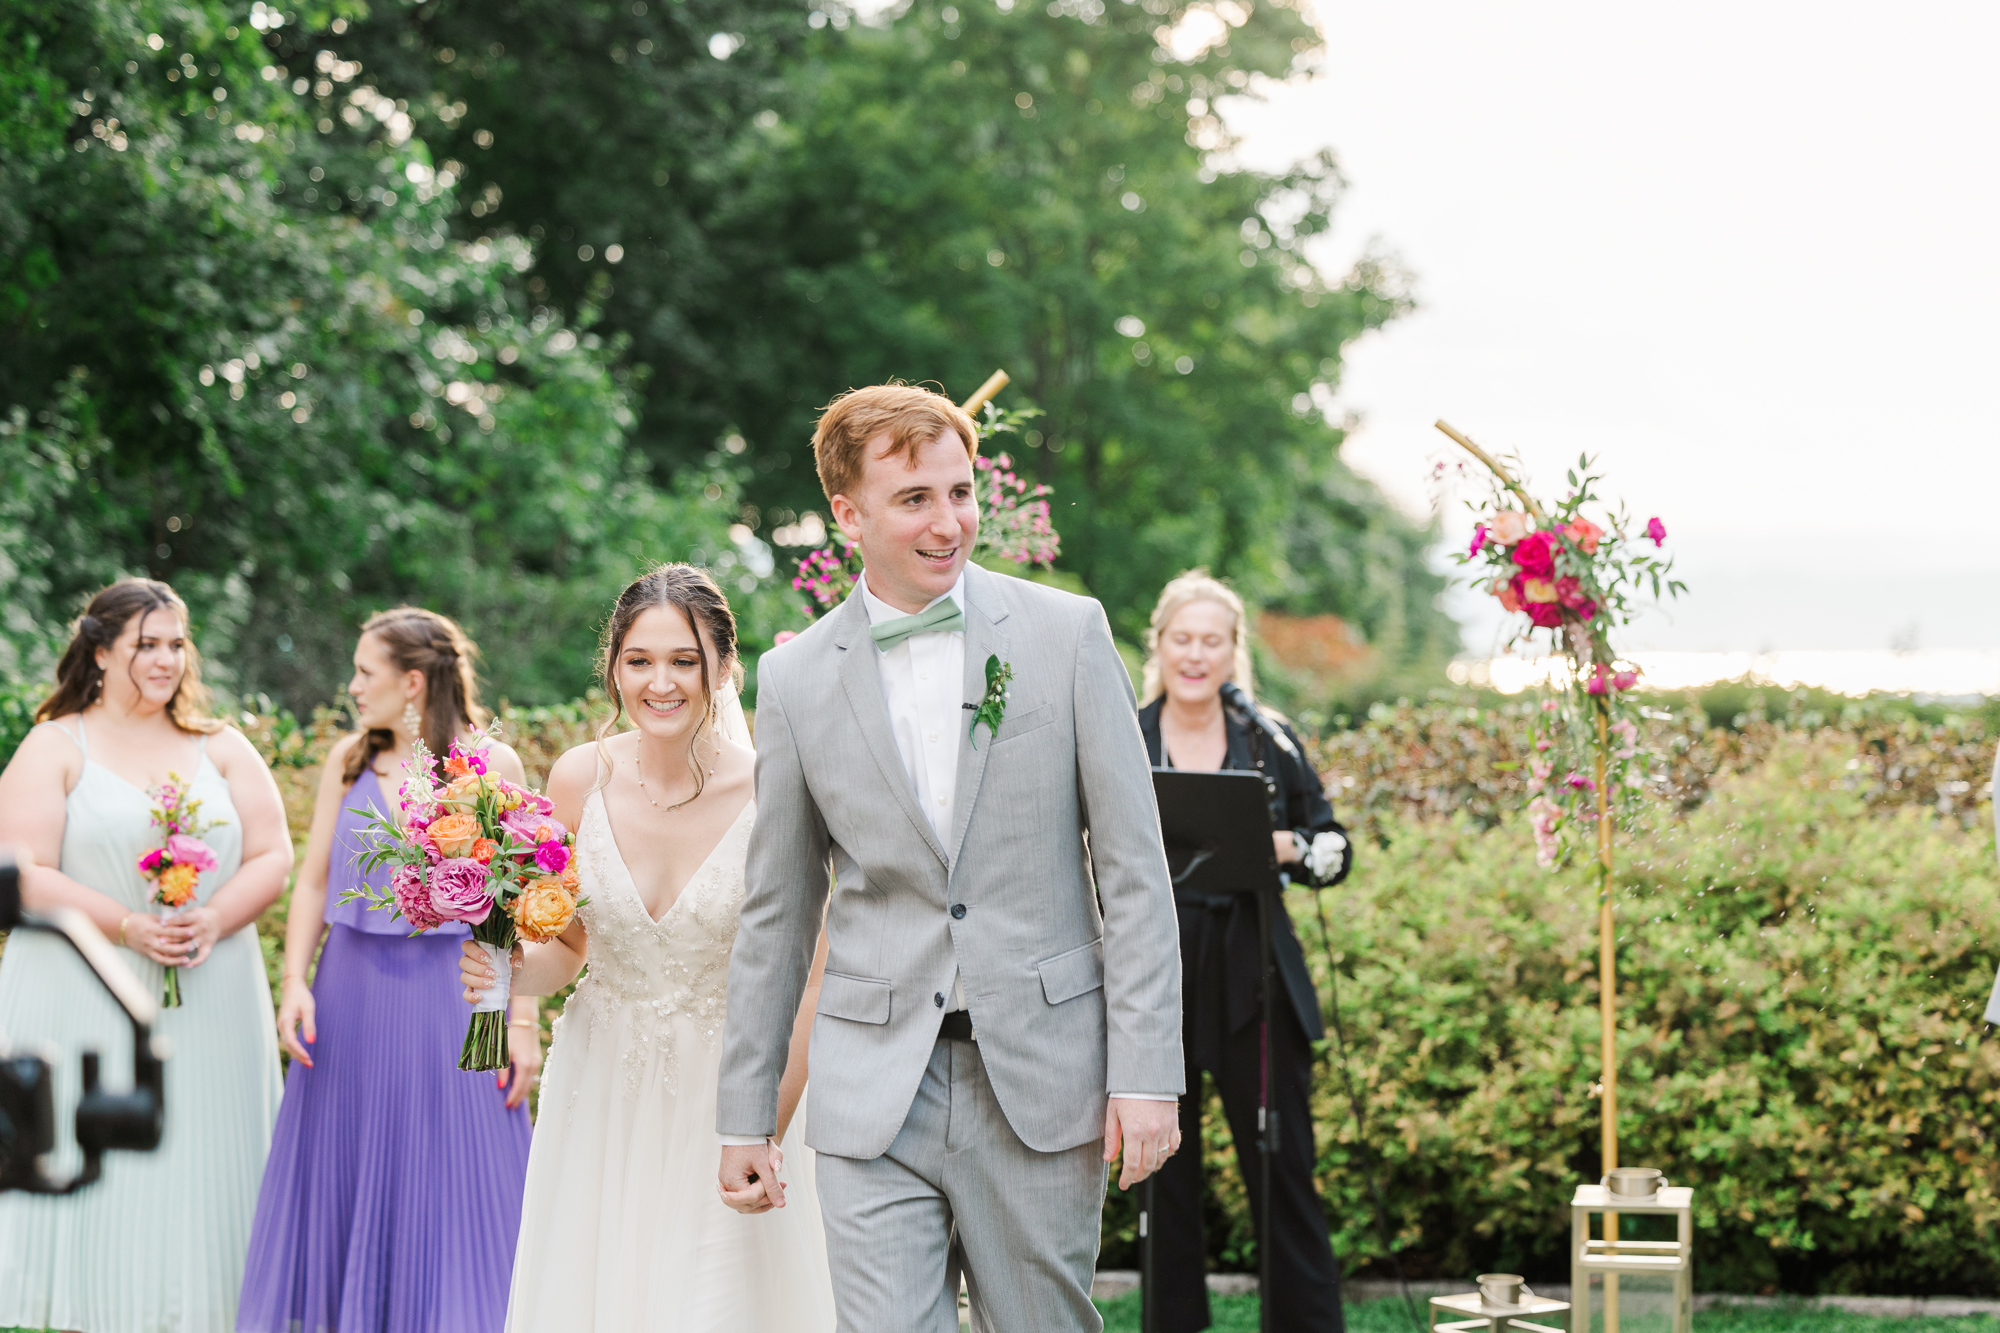 Unique Wedding at Briarcliff Manor in Summertime